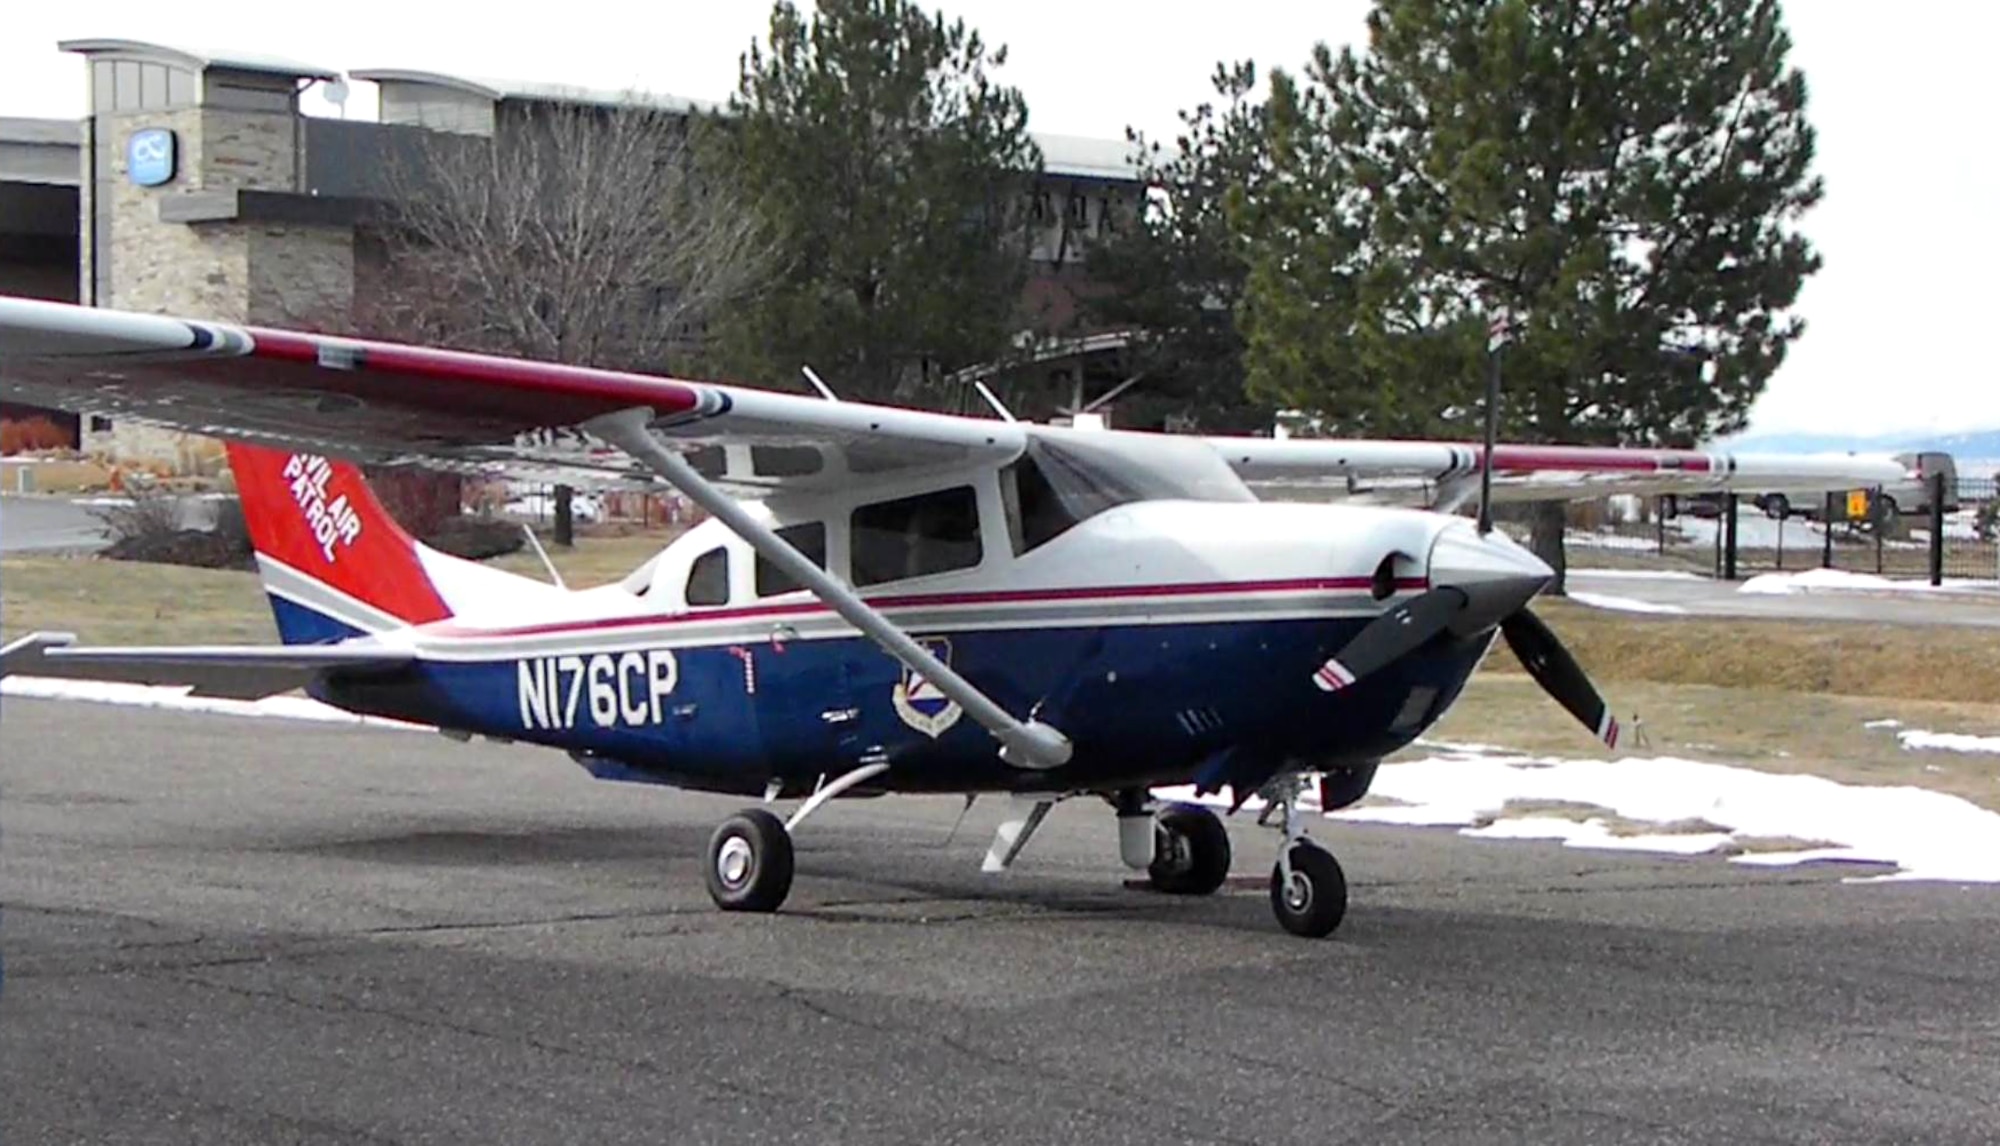 An enhanced Surrogate Predator 3 is prepared for takeoff. Intelligence, surveillance and reconnaissance sensors were added to the Cesna 182 so it can mimic a Predator unmanned aerial vehicle. Air Force Research Laboratory’s Directed Energy Directorate at Kirtland modified the Civil Air Patrol aircraft for use in military training exercises. (Courtesy photo)